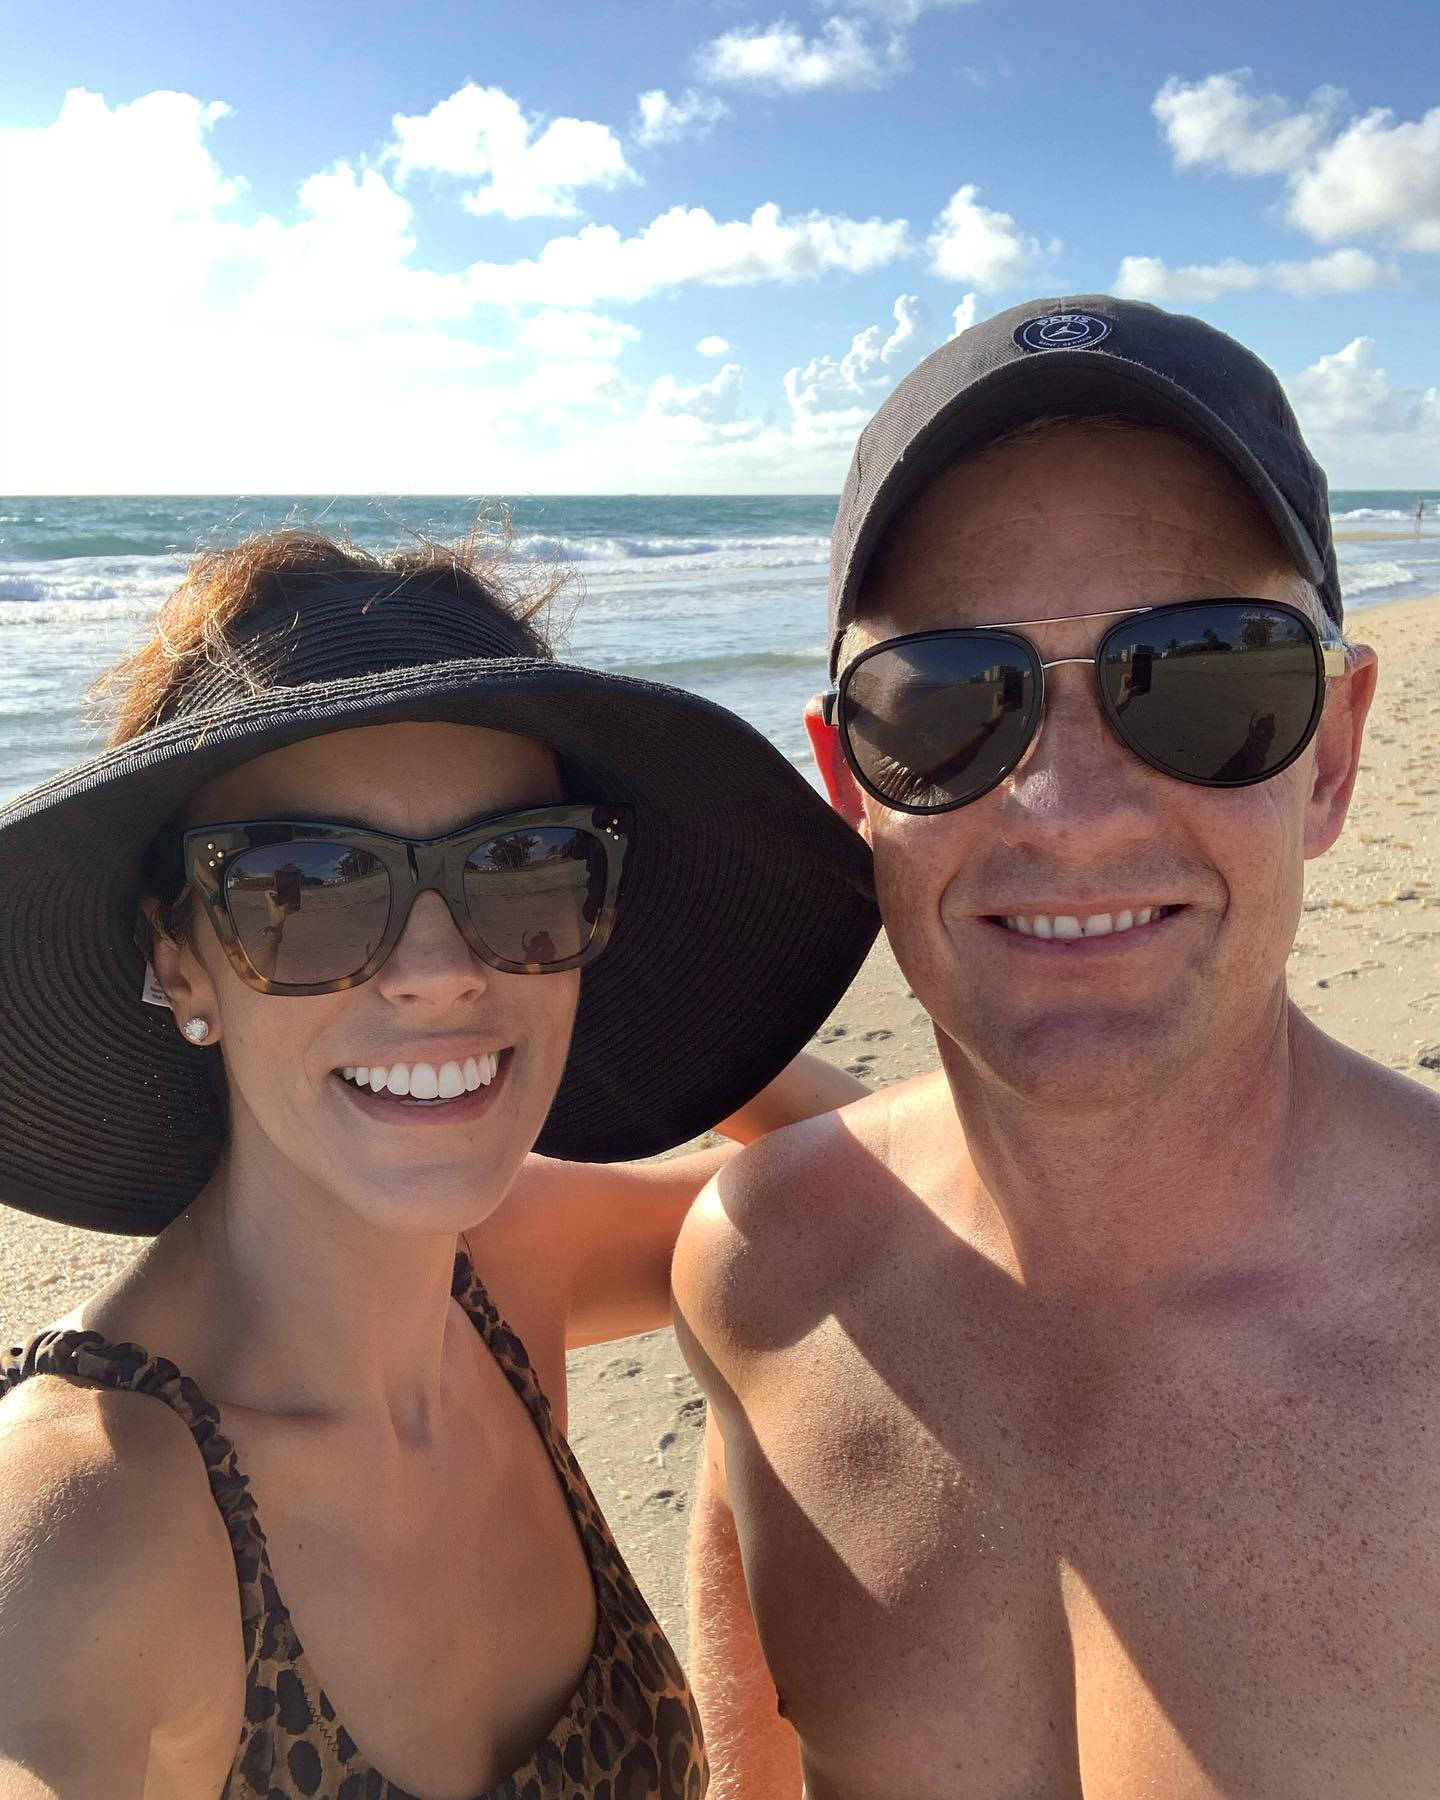 Luke Donald with his wife enjoying a beach vacation. Wallpaper